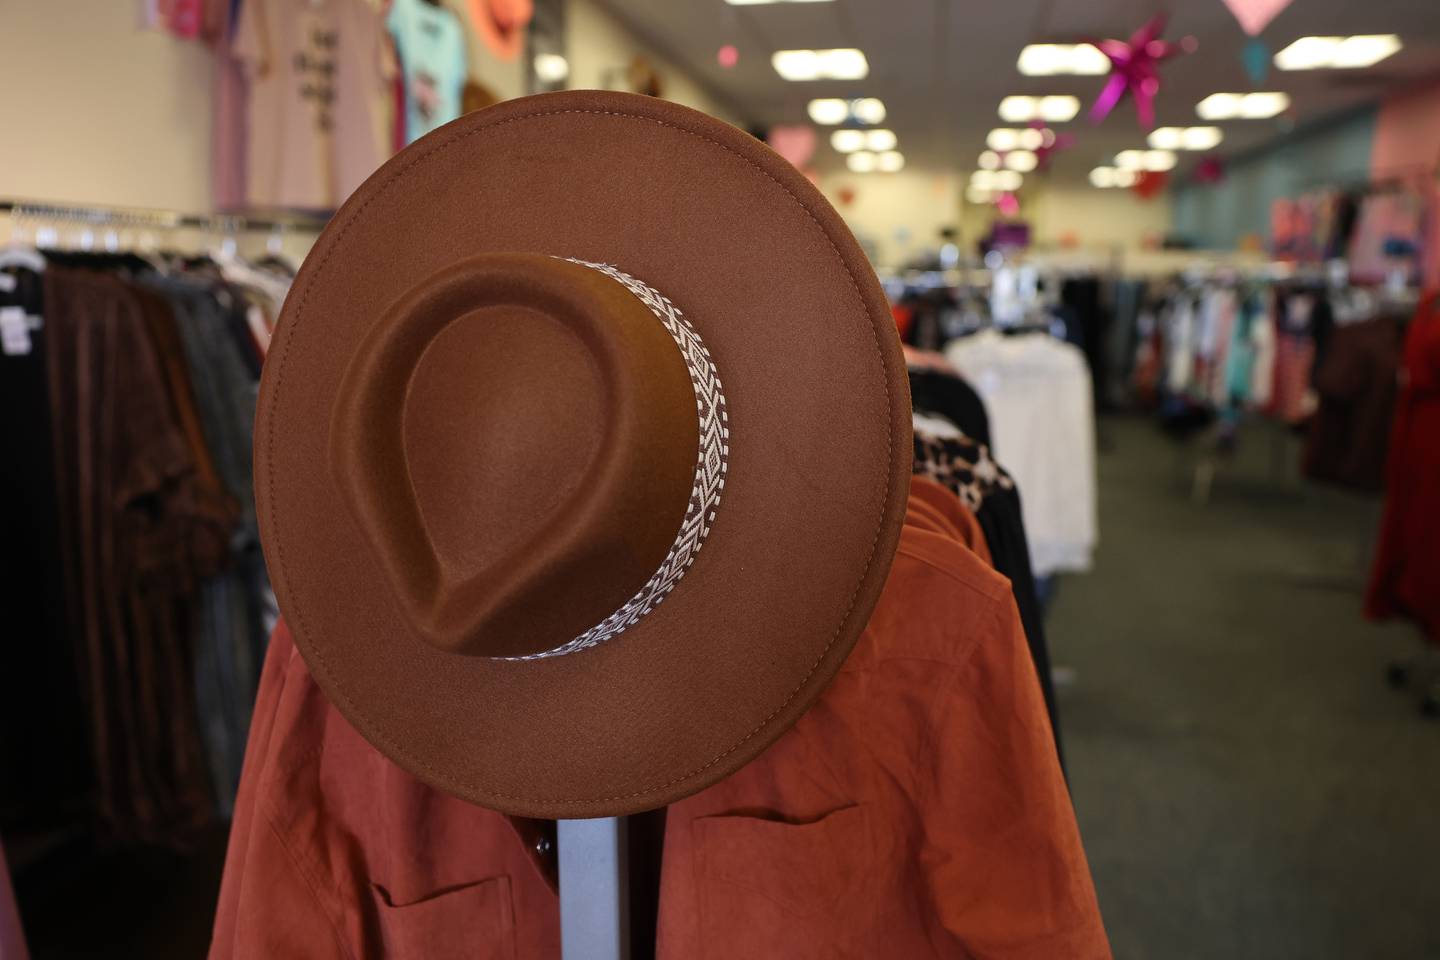 Kate’s Unique Boutique in Crest Hill offers a variety of fashion merchandise from hats to customized clothing.